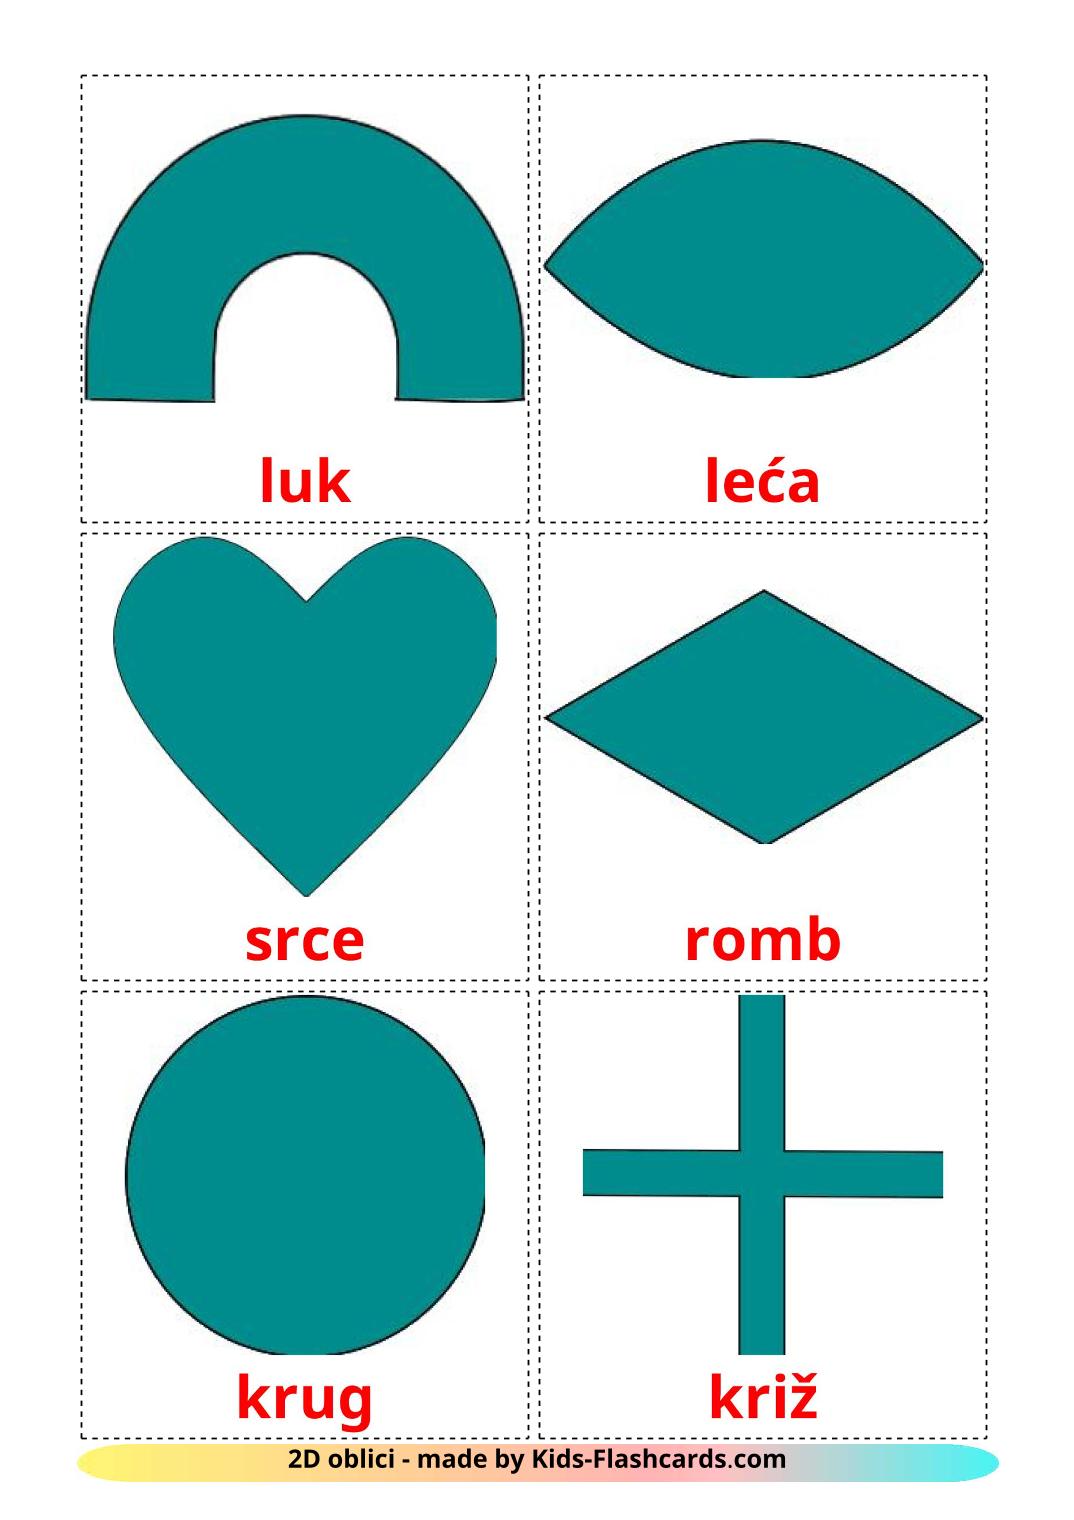 2D Shapes - 35 Free Printable croatian Flashcards 